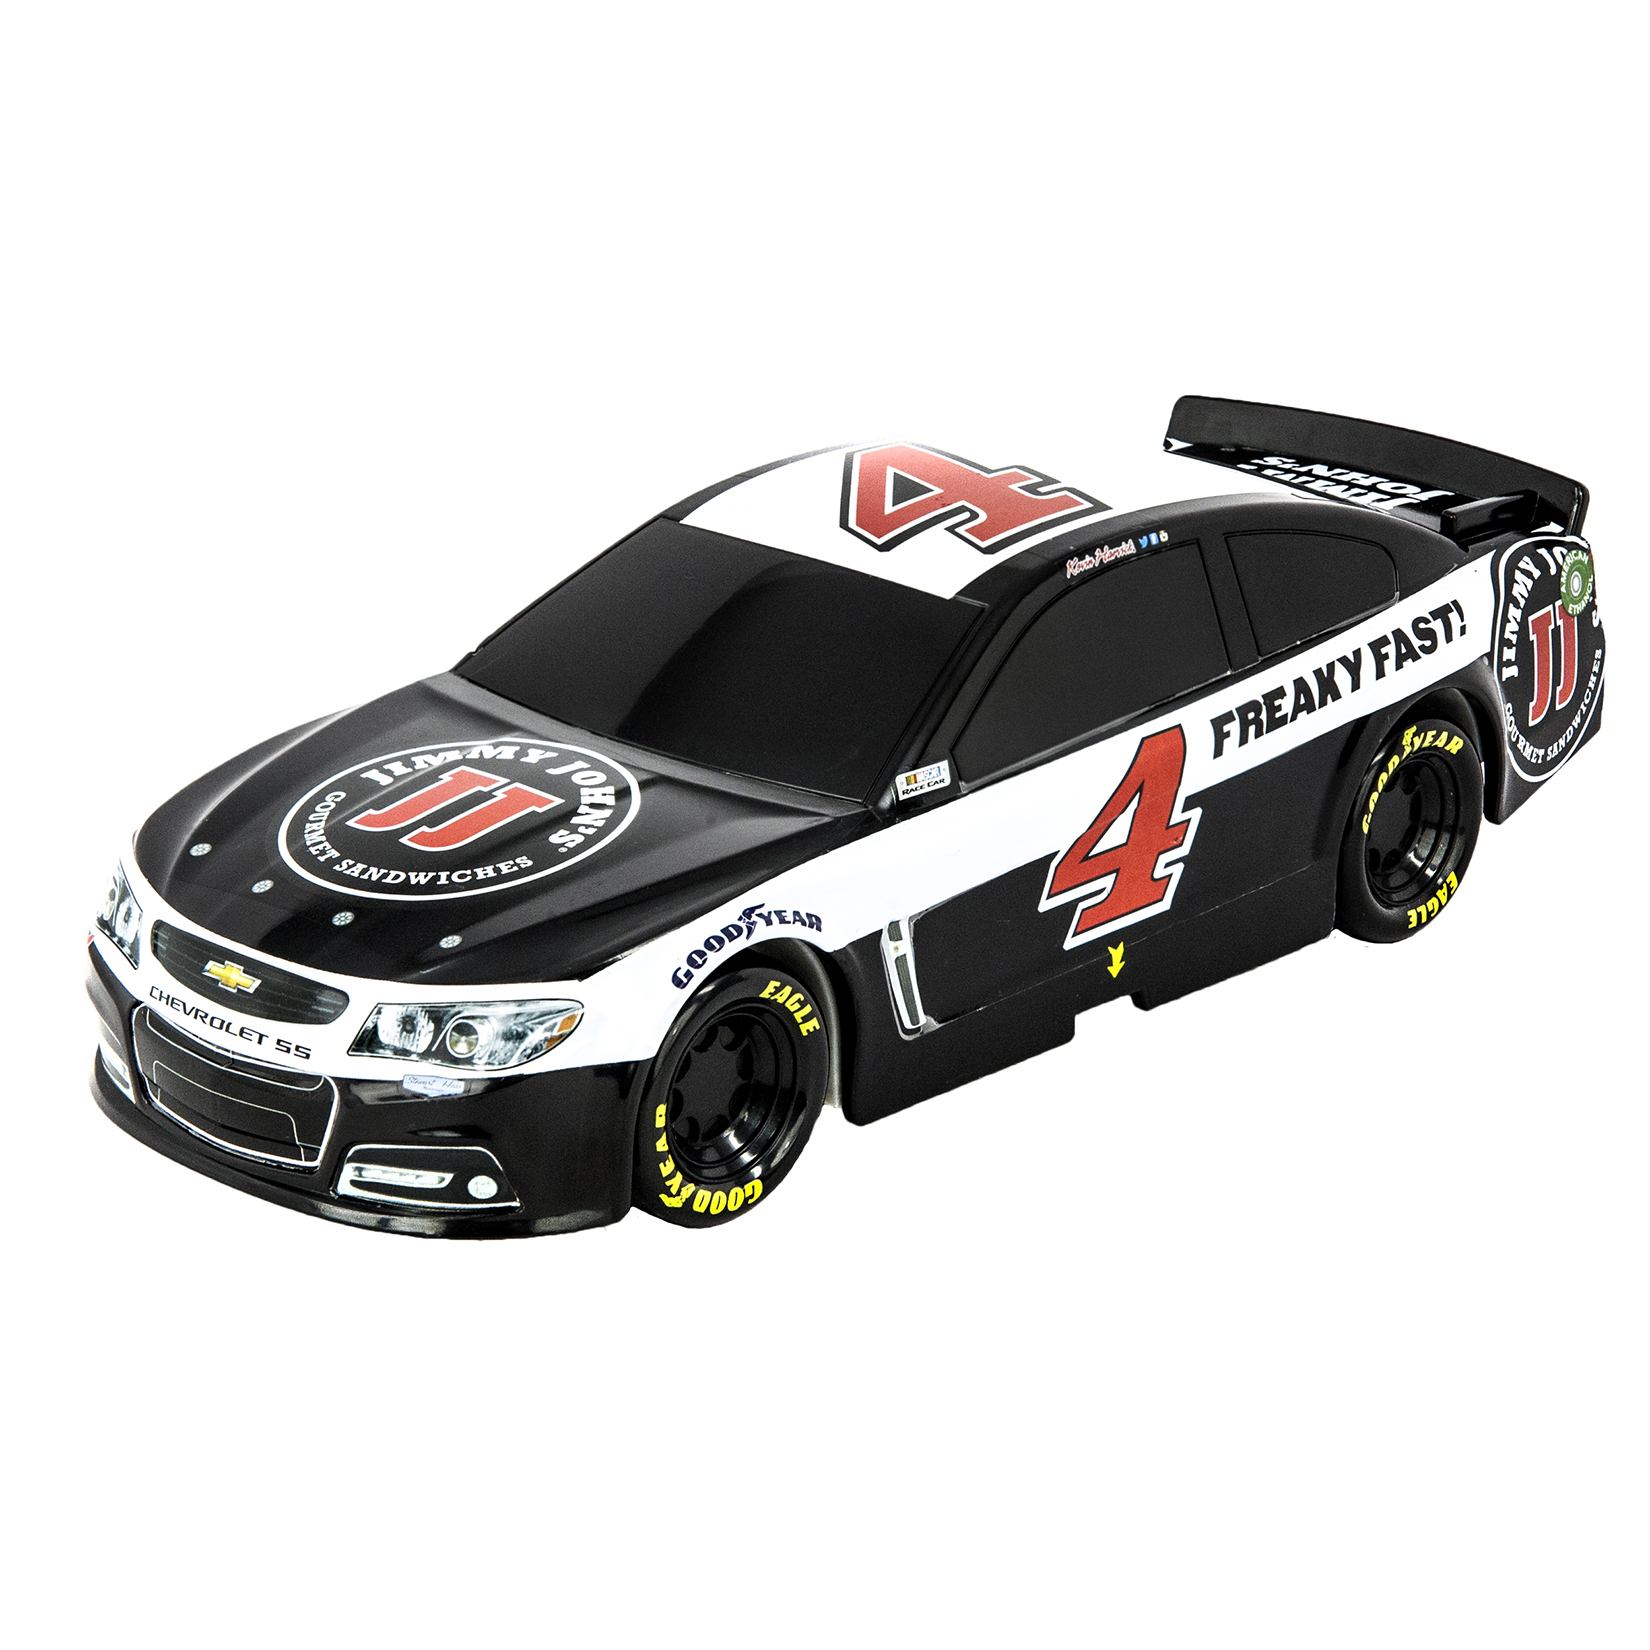 Kevin Harvick # 4 Jimmy John's 2014 Chevy SS 1:18 Scale ARC Plastic Toy Car